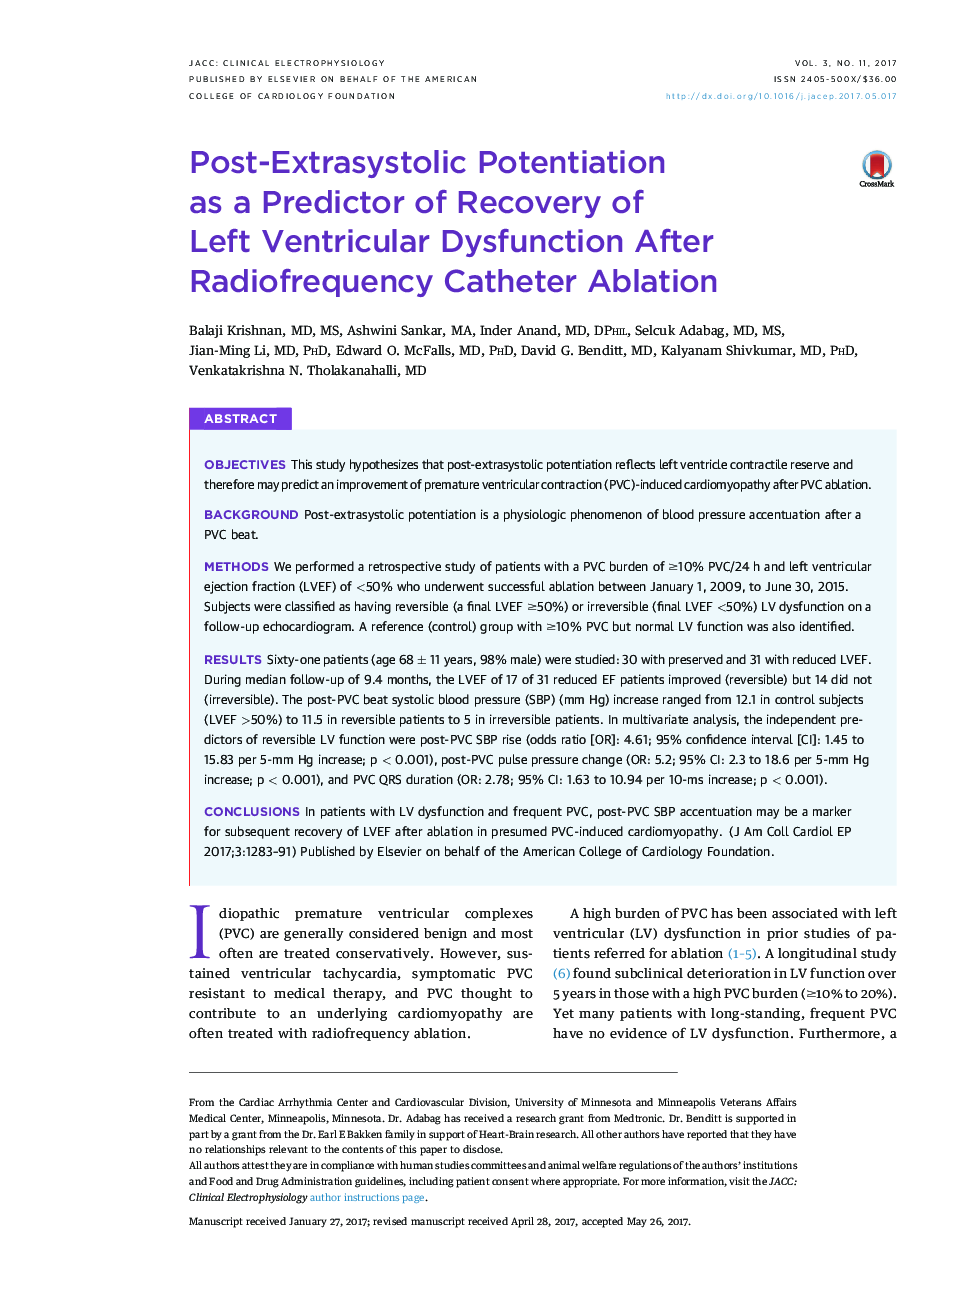 Post-Extrasystolic Potentiation asÂ aÂ Predictor of Recovery of LeftÂ VentricularÂ Dysfunction After Radiofrequency Catheter Ablation